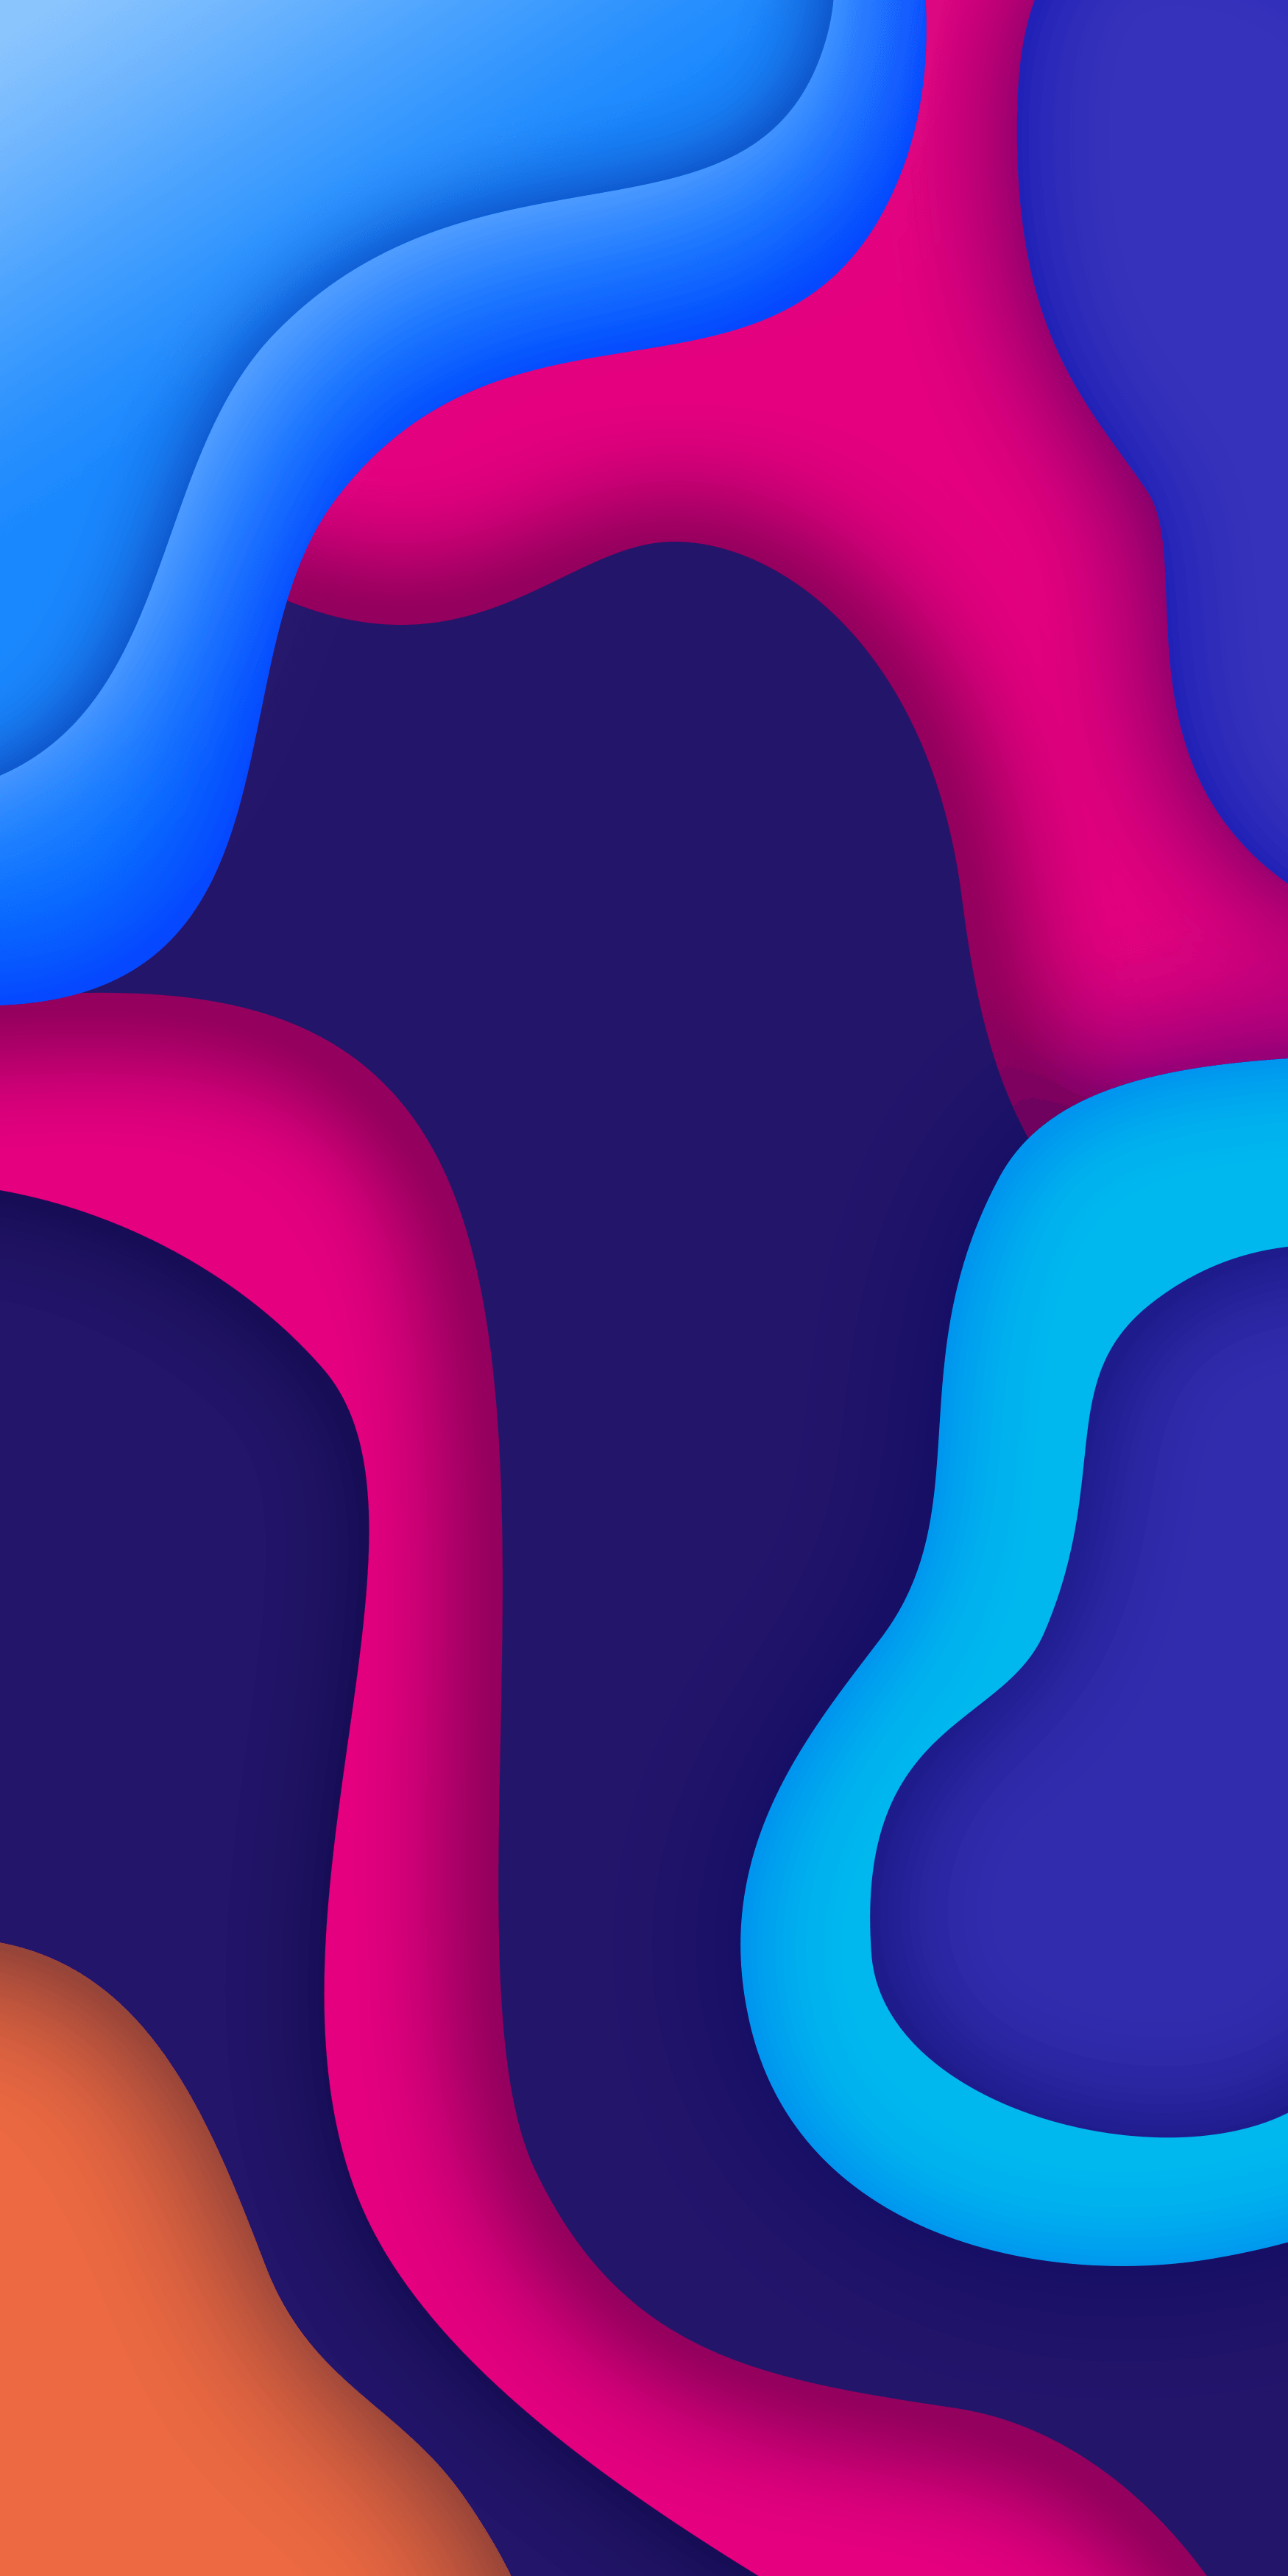 iPhone 11 Pro Maxs Max /Xr. Mkbhd wallpaper, Abstract iphone